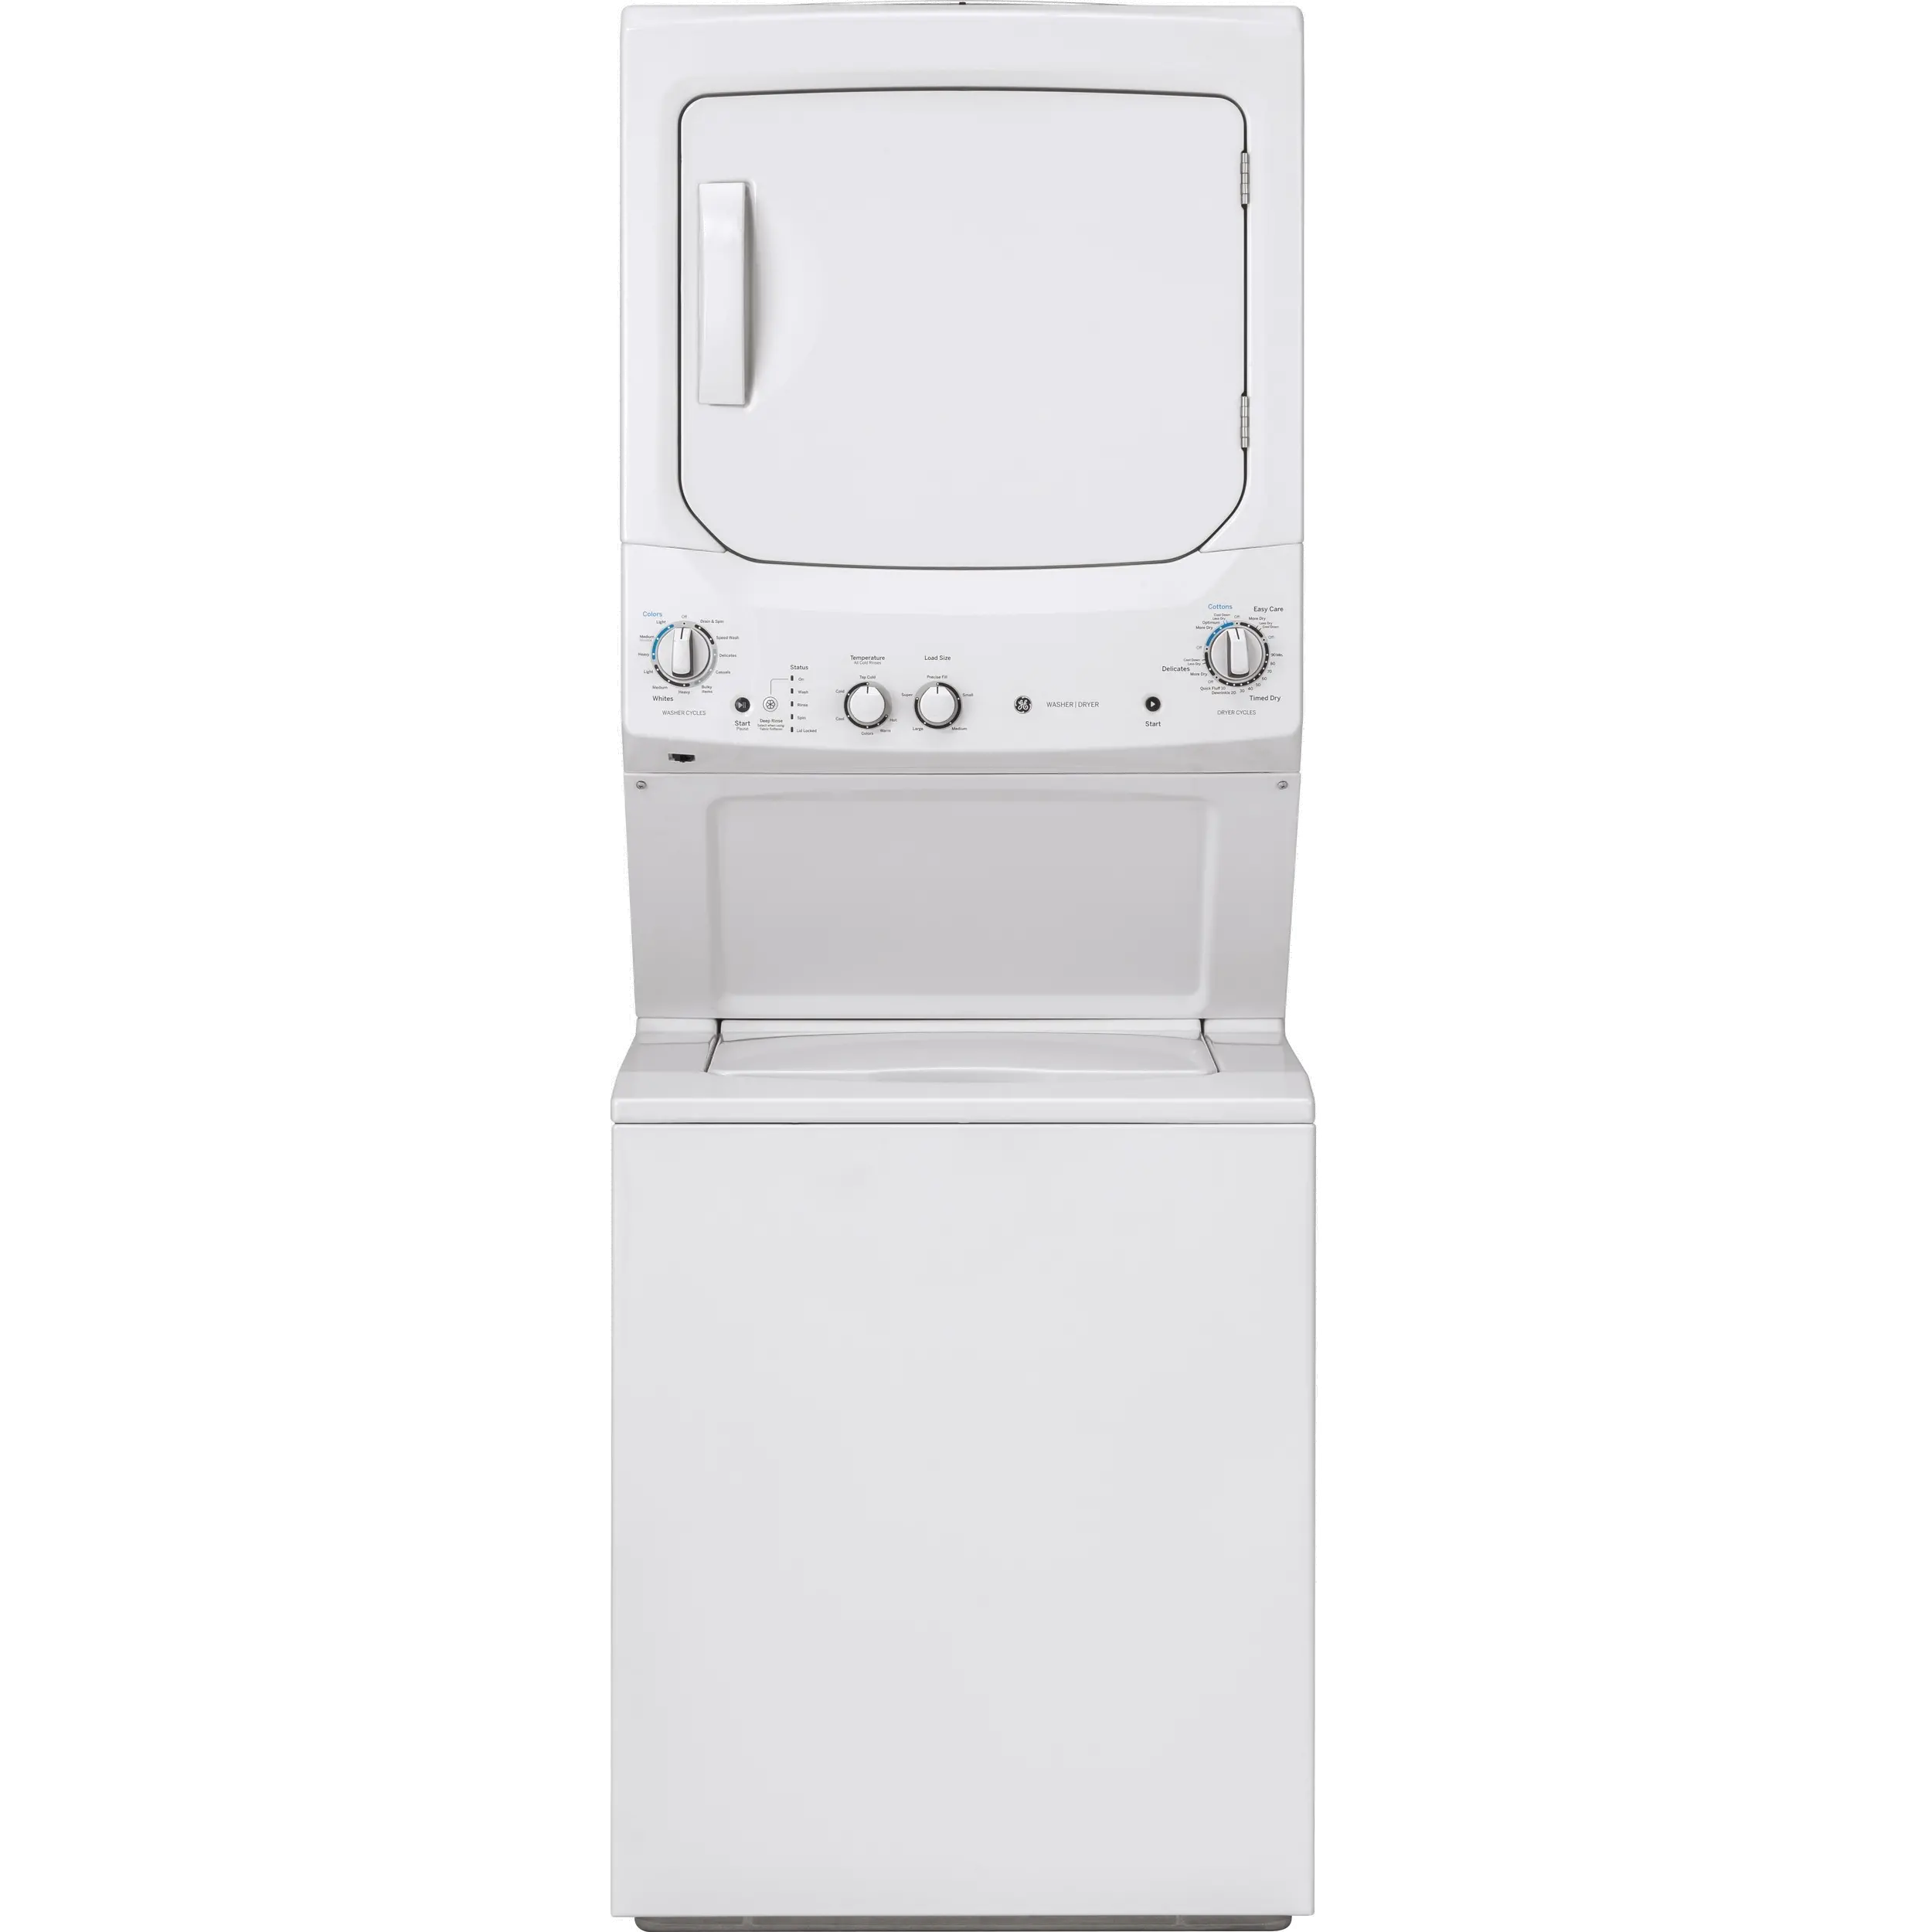 GUD27ESSMWW GE Unitized Spacemaker 3.8 cu. ft. Washer and 5.9 cu. ft. Electric Dryer - White-1